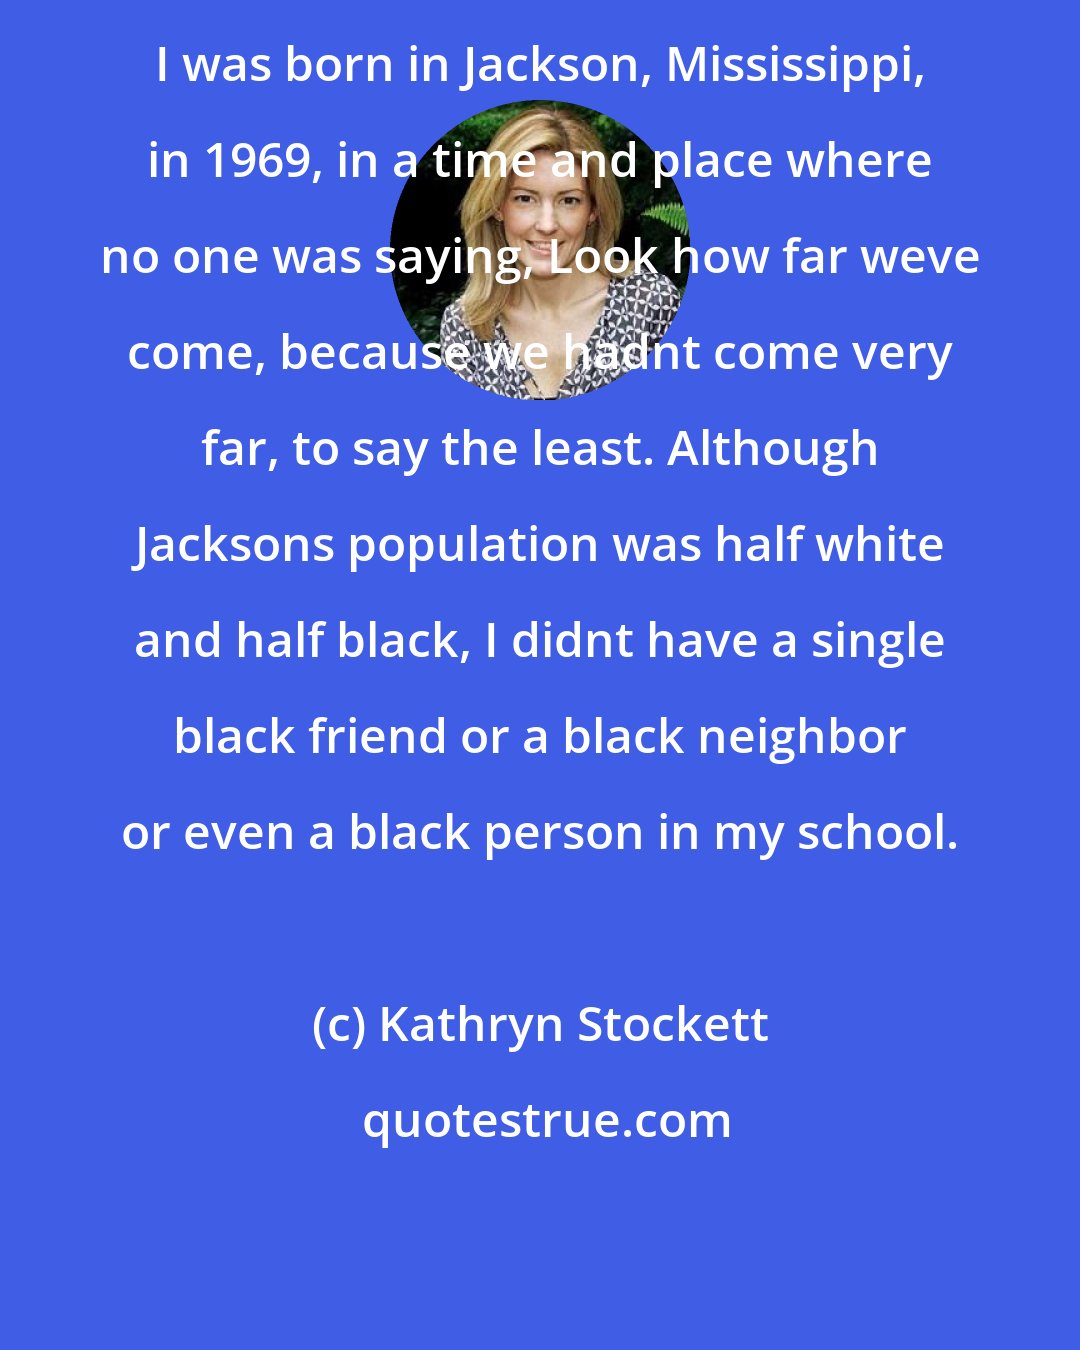 Kathryn Stockett: I was born in Jackson, Mississippi, in 1969, in a time and place where no one was saying, Look how far weve come, because we hadnt come very far, to say the least. Although Jacksons population was half white and half black, I didnt have a single black friend or a black neighbor or even a black person in my school.